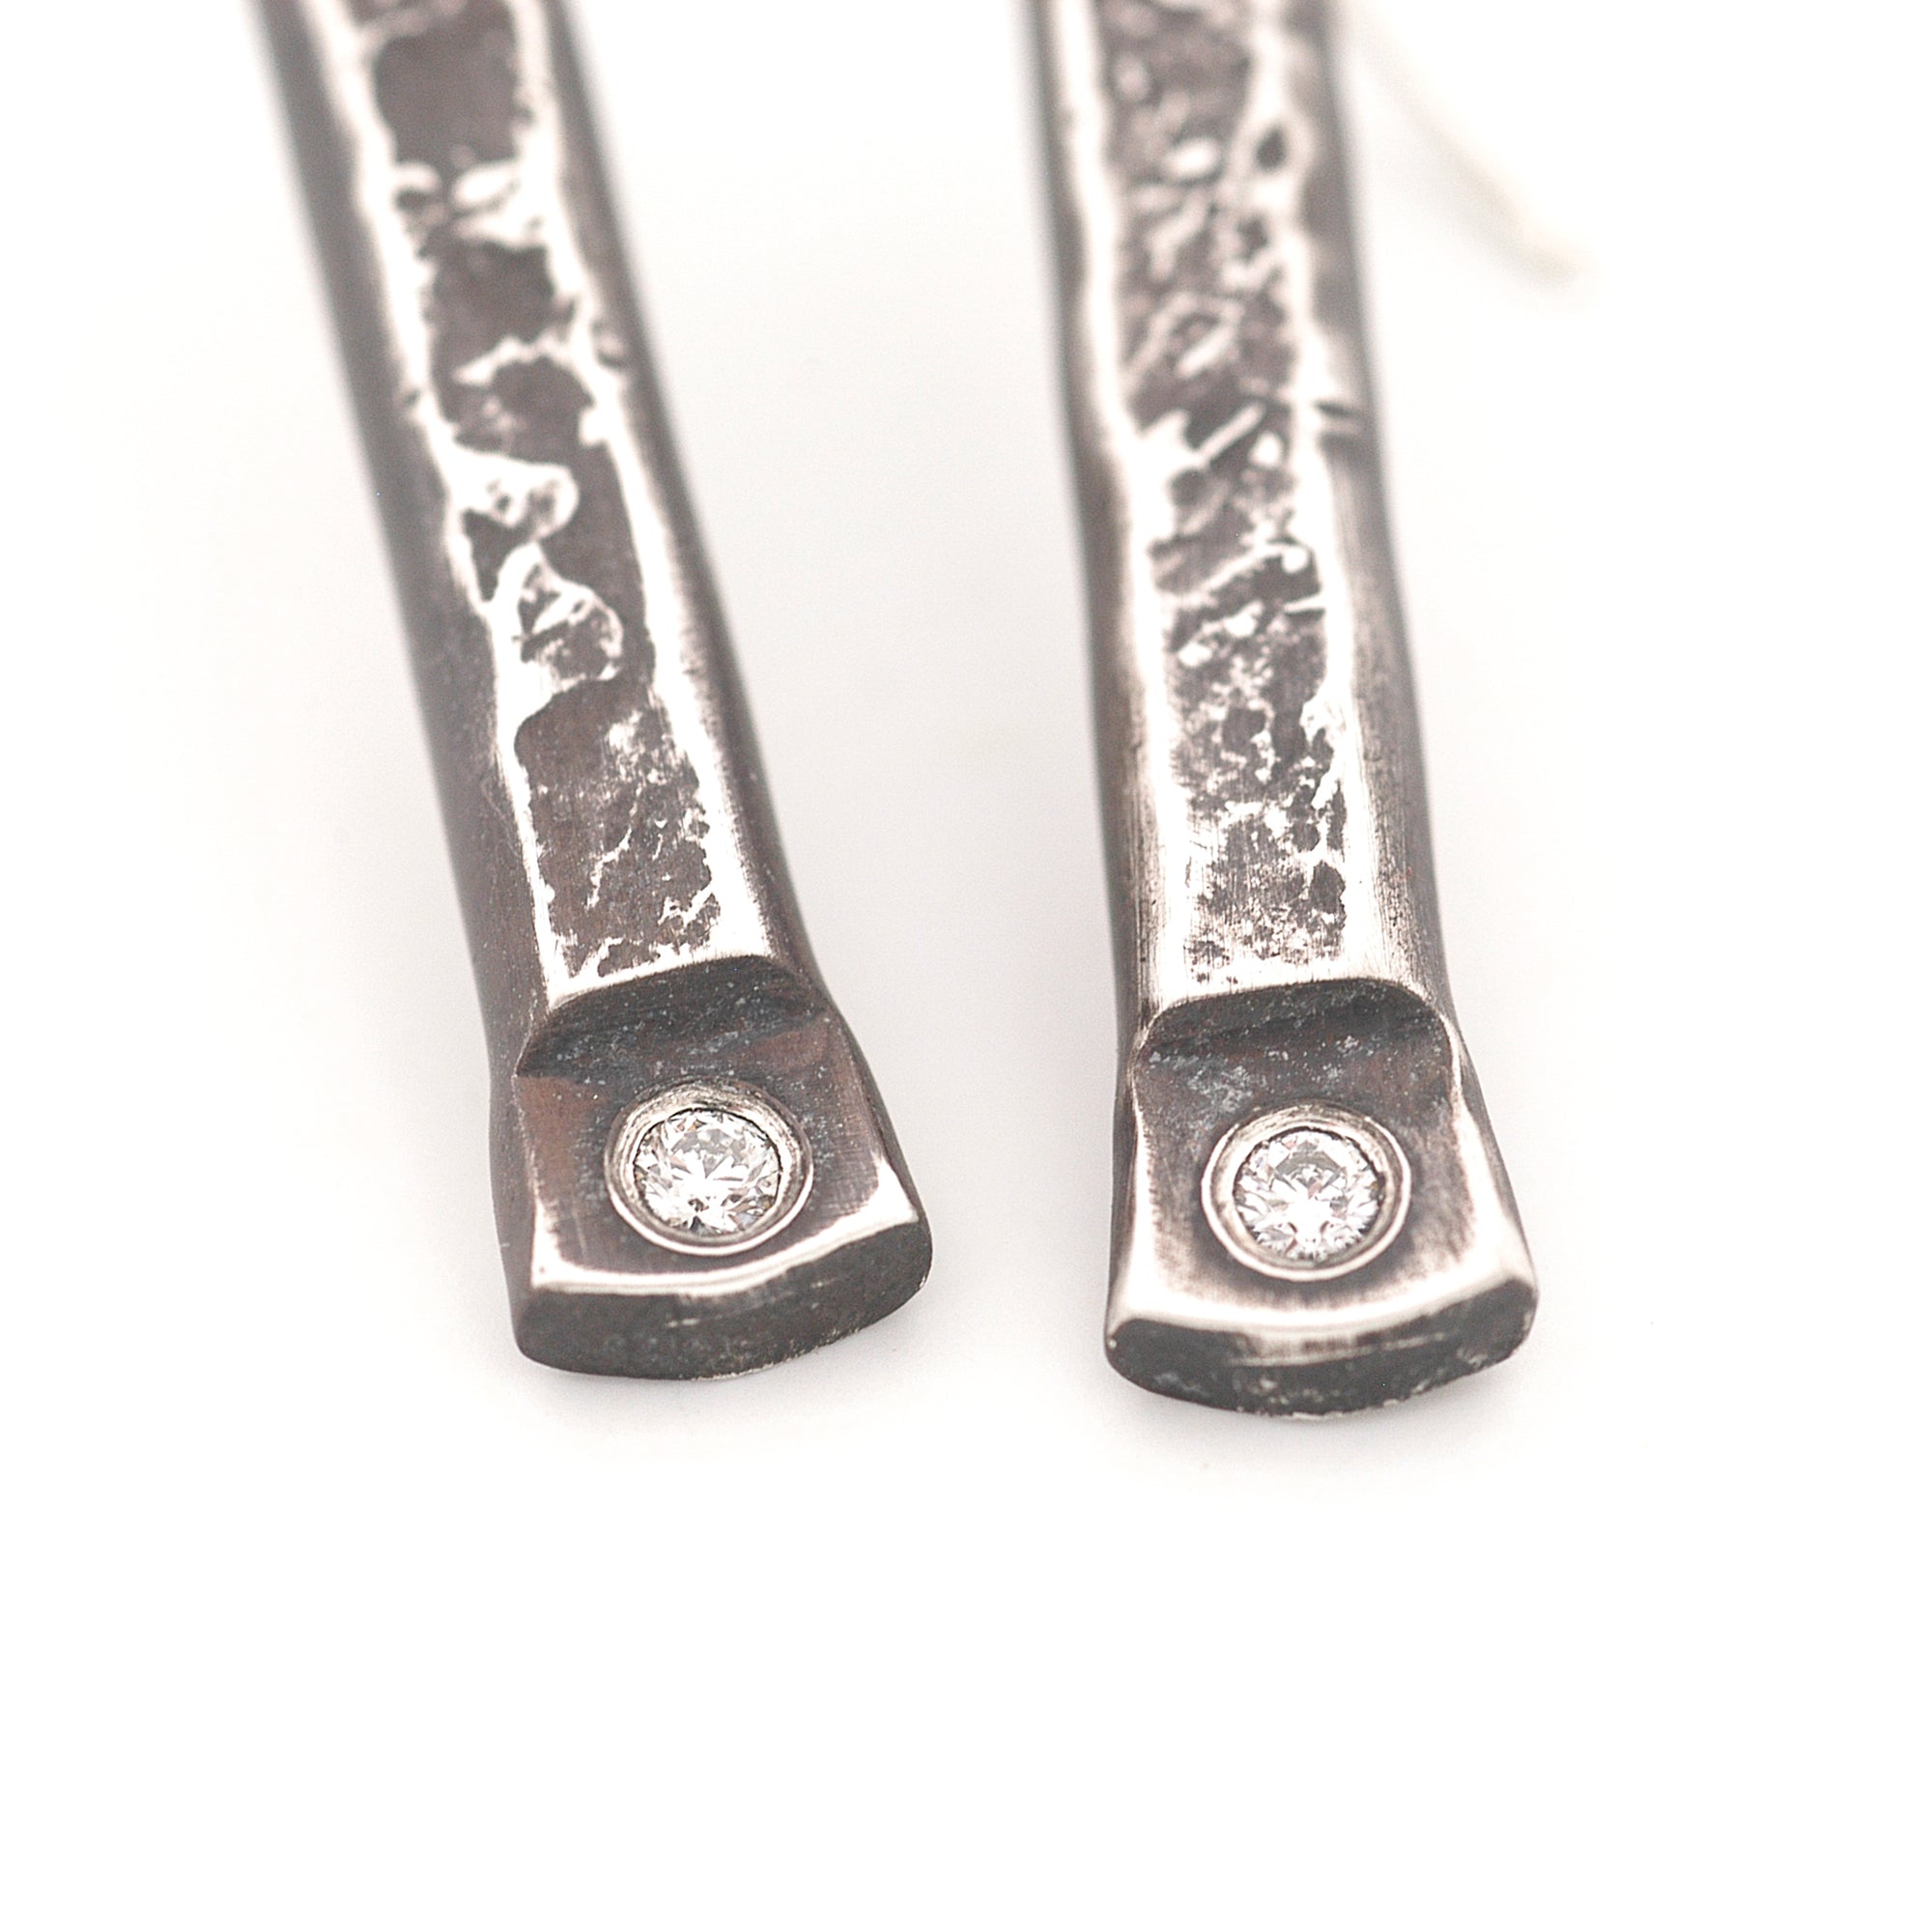 Textured Stick Earrings with Ideal Cut Diamonds